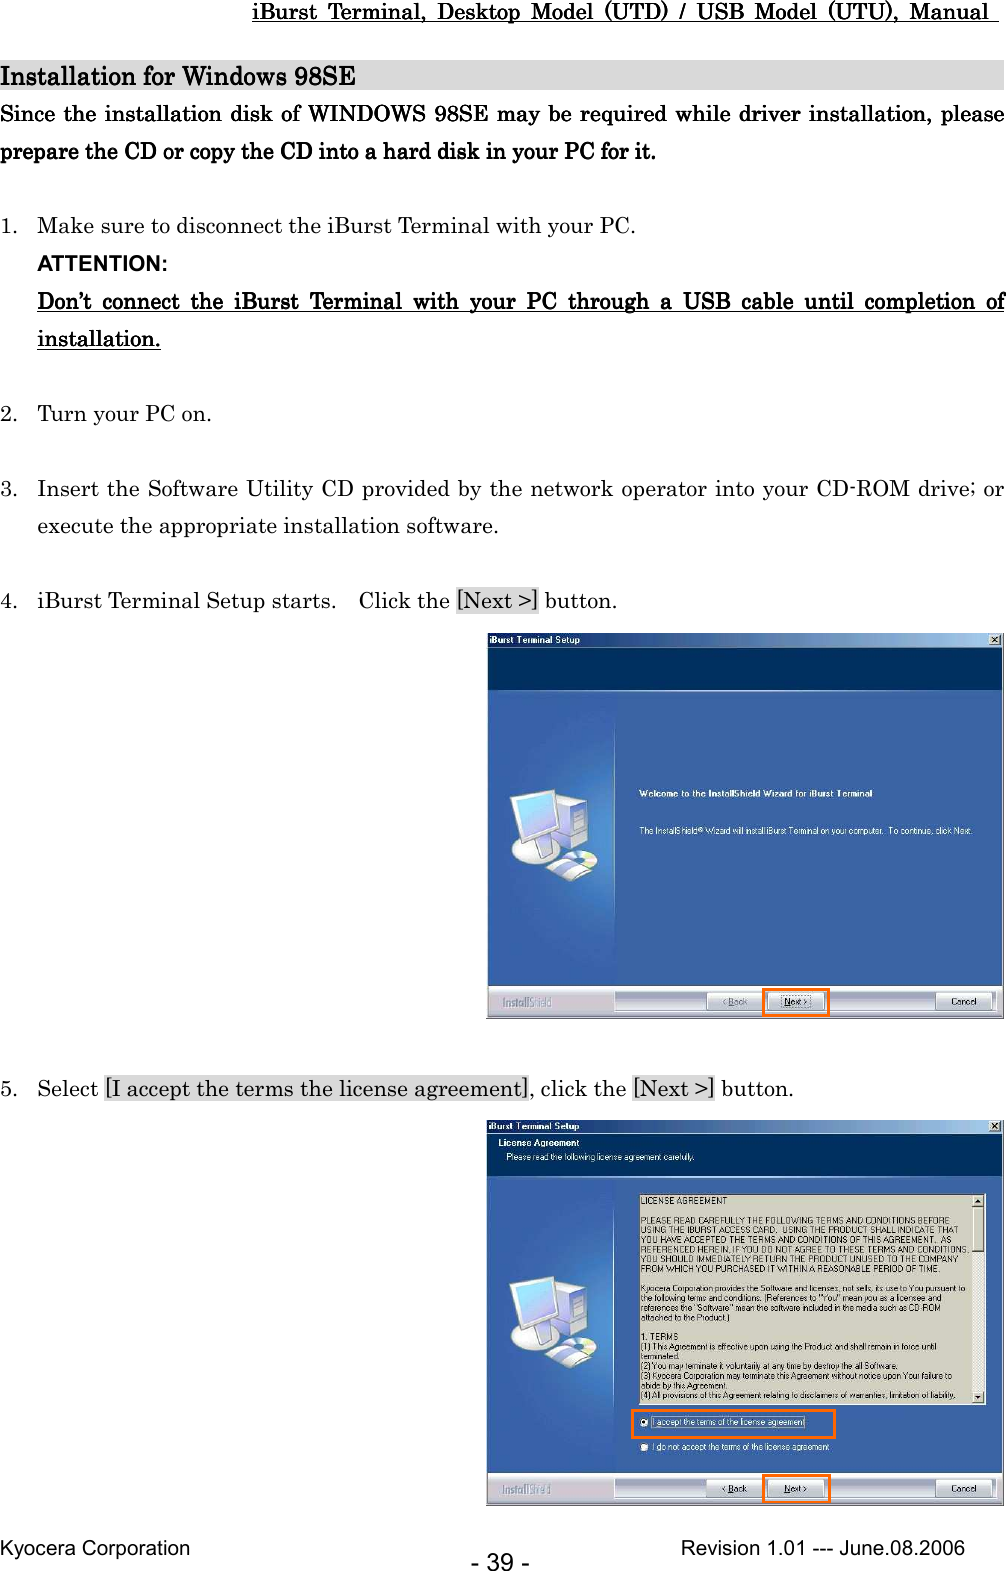 iBurst  Terminal,  Desktop  Model  (UTD)  /  USB  Model  (UTU),  Manual iBurst  Terminal,  Desktop  Model  (UTD)  /  USB  Model  (UTU),  Manual iBurst  Terminal,  Desktop  Model  (UTD)  /  USB  Model  (UTU),  Manual iBurst  Terminal,  Desktop  Model  (UTD)  /  USB  Model  (UTU),  Manual       Kyocera Corporation                                                                                              Revision 1.01 --- June.08.2006 - 39 - Installation for Windows 98SEInstallation for Windows 98SEInstallation for Windows 98SEInstallation for Windows 98SE                                                                                                                                                                                                                    Since tSince tSince tSince the installation disk of WINDOWS 98SE he installation disk of WINDOWS 98SE he installation disk of WINDOWS 98SE he installation disk of WINDOWS 98SE  may may may may bbbbe e e e required while required while required while required while  driver installation, please driver installation, please driver installation, please driver installation, please prepare prepare prepare prepare the CD or copy the the CD or copy the the CD or copy the the CD or copy the CDCDCDCD    into into into into a hard disk in your PC a hard disk in your PC a hard disk in your PC a hard disk in your PC for it.for it.for it.for it.     1. Make sure to disconnect the iBurst Terminal with your PC. ATTENTION: DonDonDonDon’’’’t  connect  the  iBurst  Terminal  with  your  PC  through  a  USB  cable  until  completion  of t  connect  the  iBurst  Terminal  with  your  PC  through  a  USB  cable  until  completion  of t  connect  the  iBurst  Terminal  with  your  PC  through  a  USB  cable  until  completion  of t  connect  the  iBurst  Terminal  with  your  PC  through  a  USB  cable  until  completion  of installation.installation.installation.installation.     2. Turn your PC on.  3. Insert the Software Utility CD provided by the network operator into your CD-ROM drive; or execute the appropriate installation software.  4. iBurst Terminal Setup starts.    Click the [Next &gt;] button.   5. Select [I accept the terms the license agreement], click the [Next &gt;] button.  